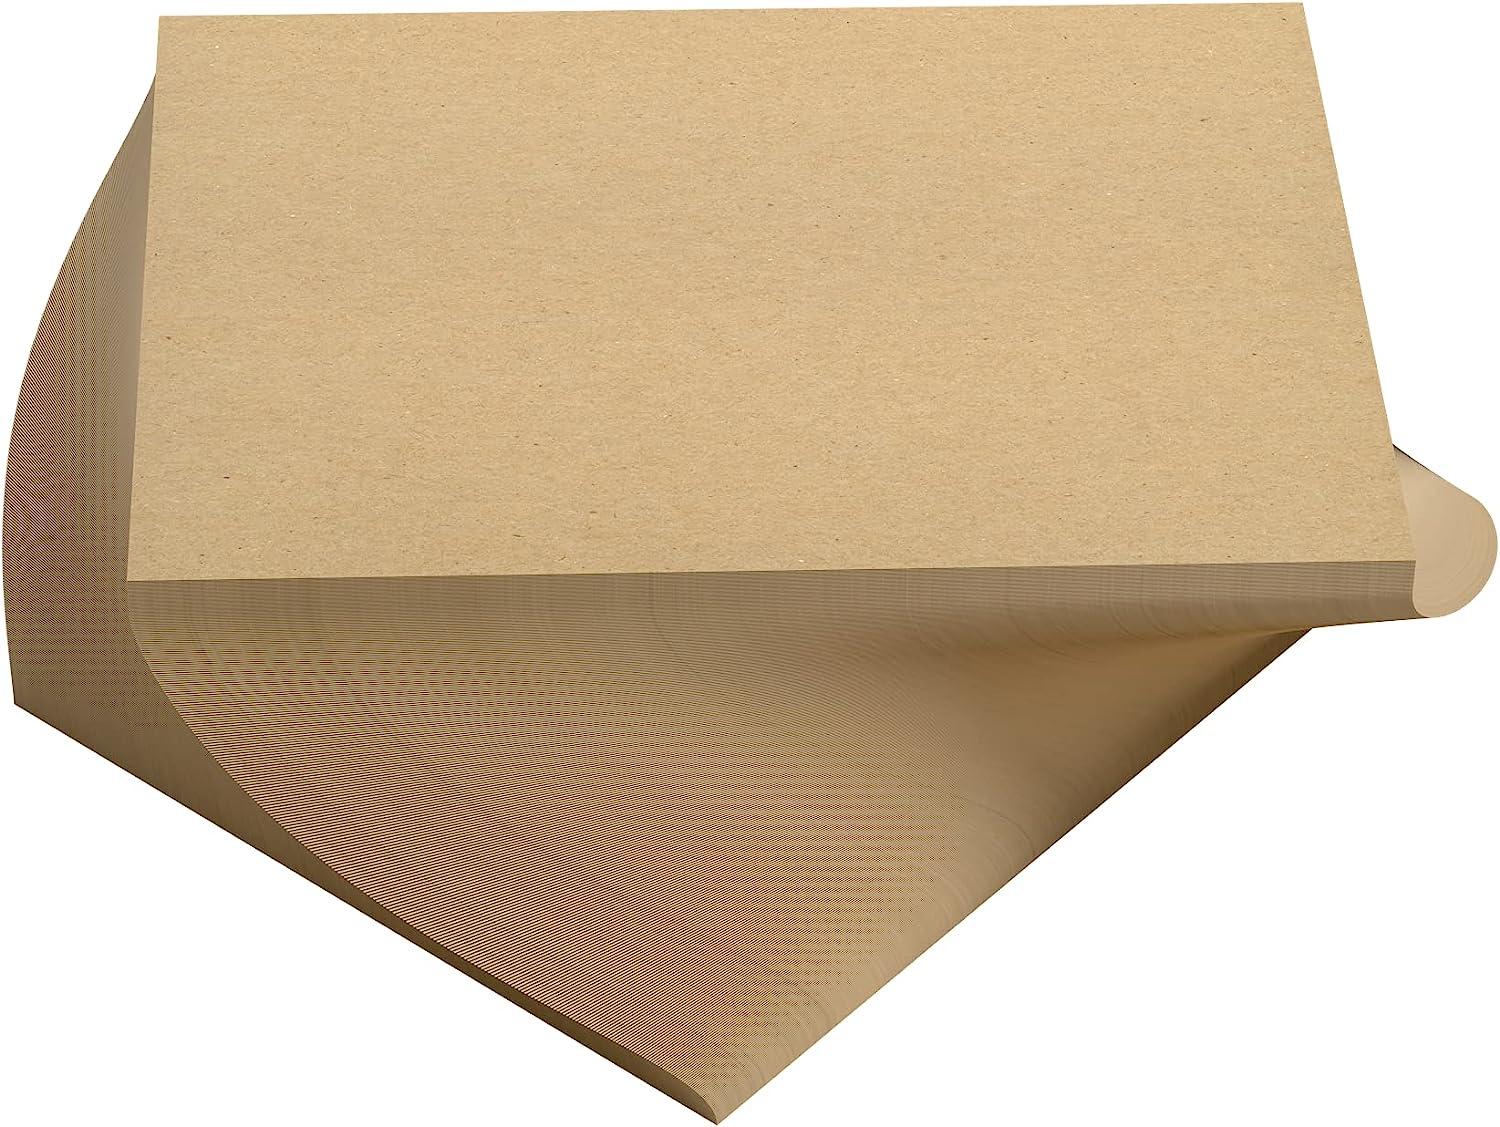  Packing Paper Sheets For Moving - 20lb - 640 Sheets